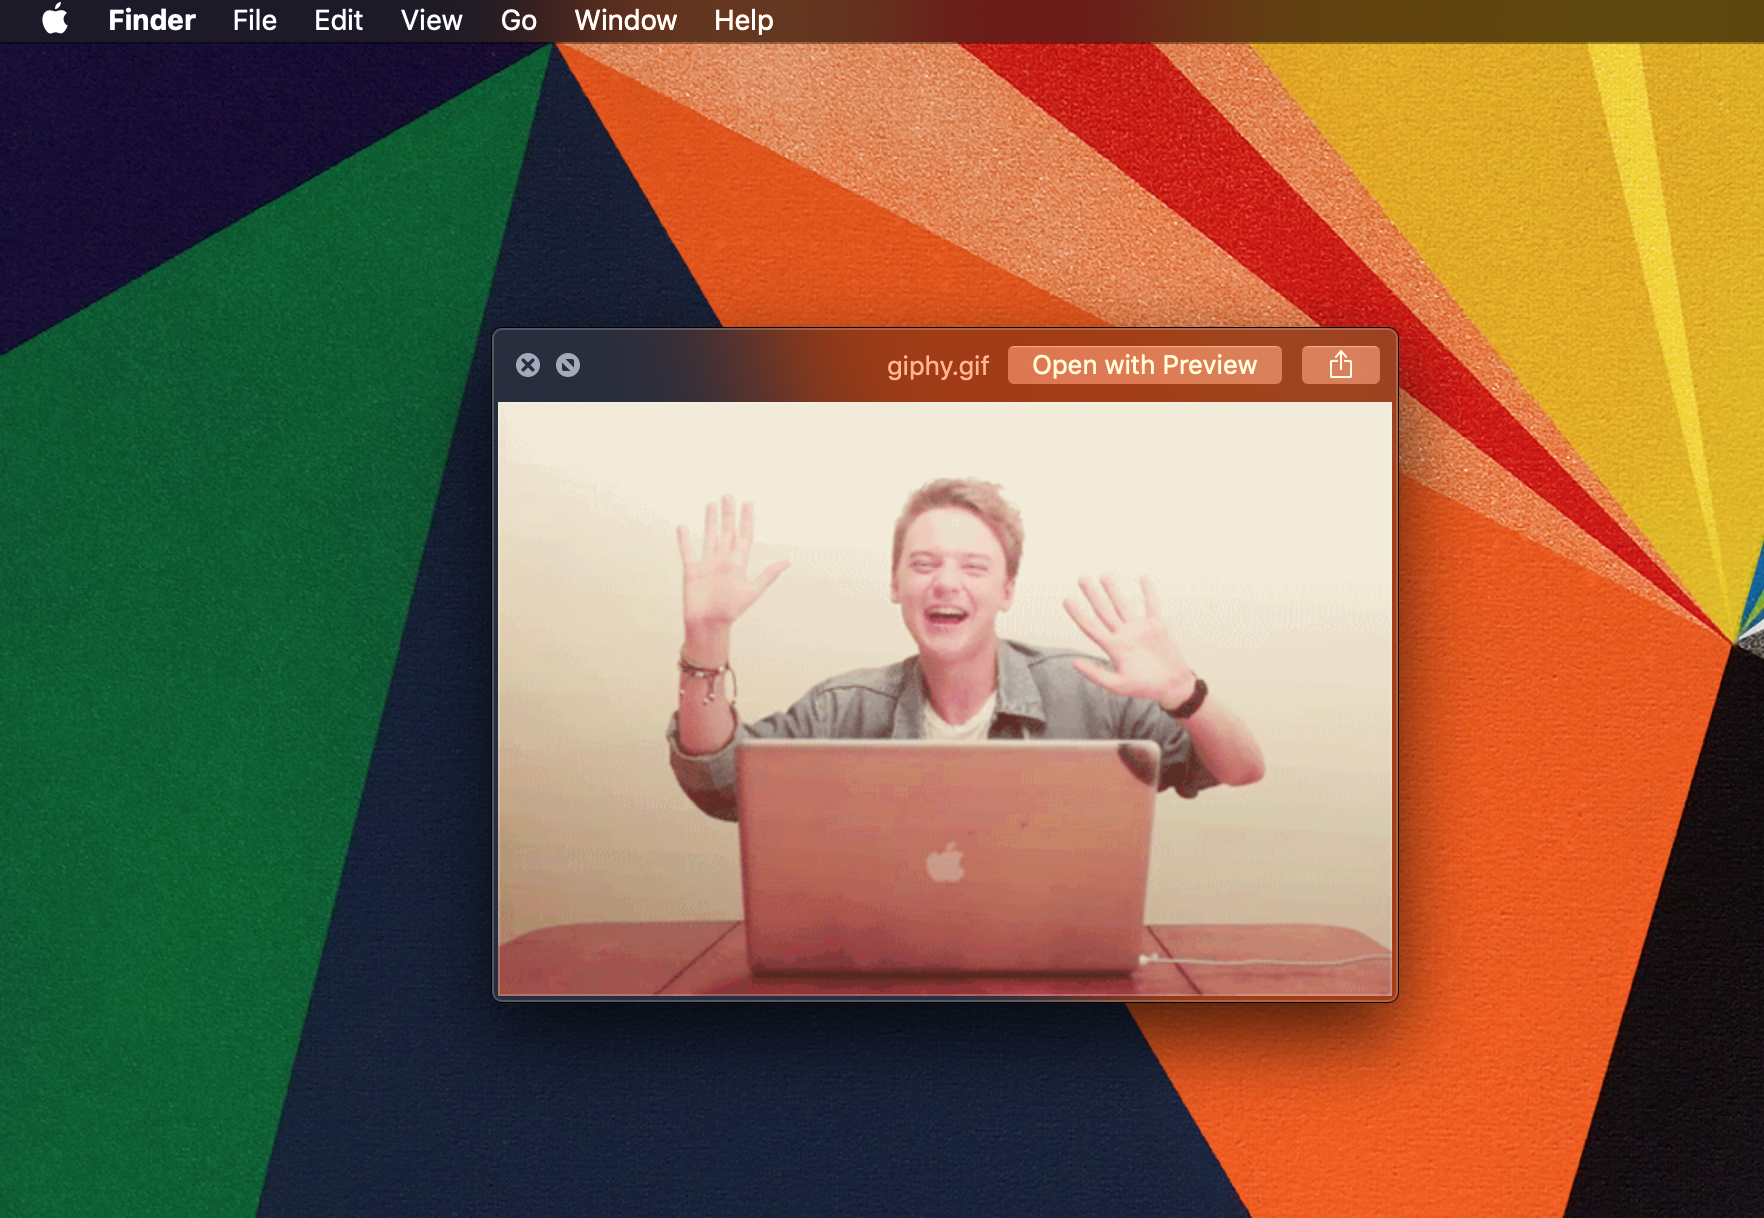 How to Make Animated GIFs with Live Photos on Your Mac- The Mac Observer